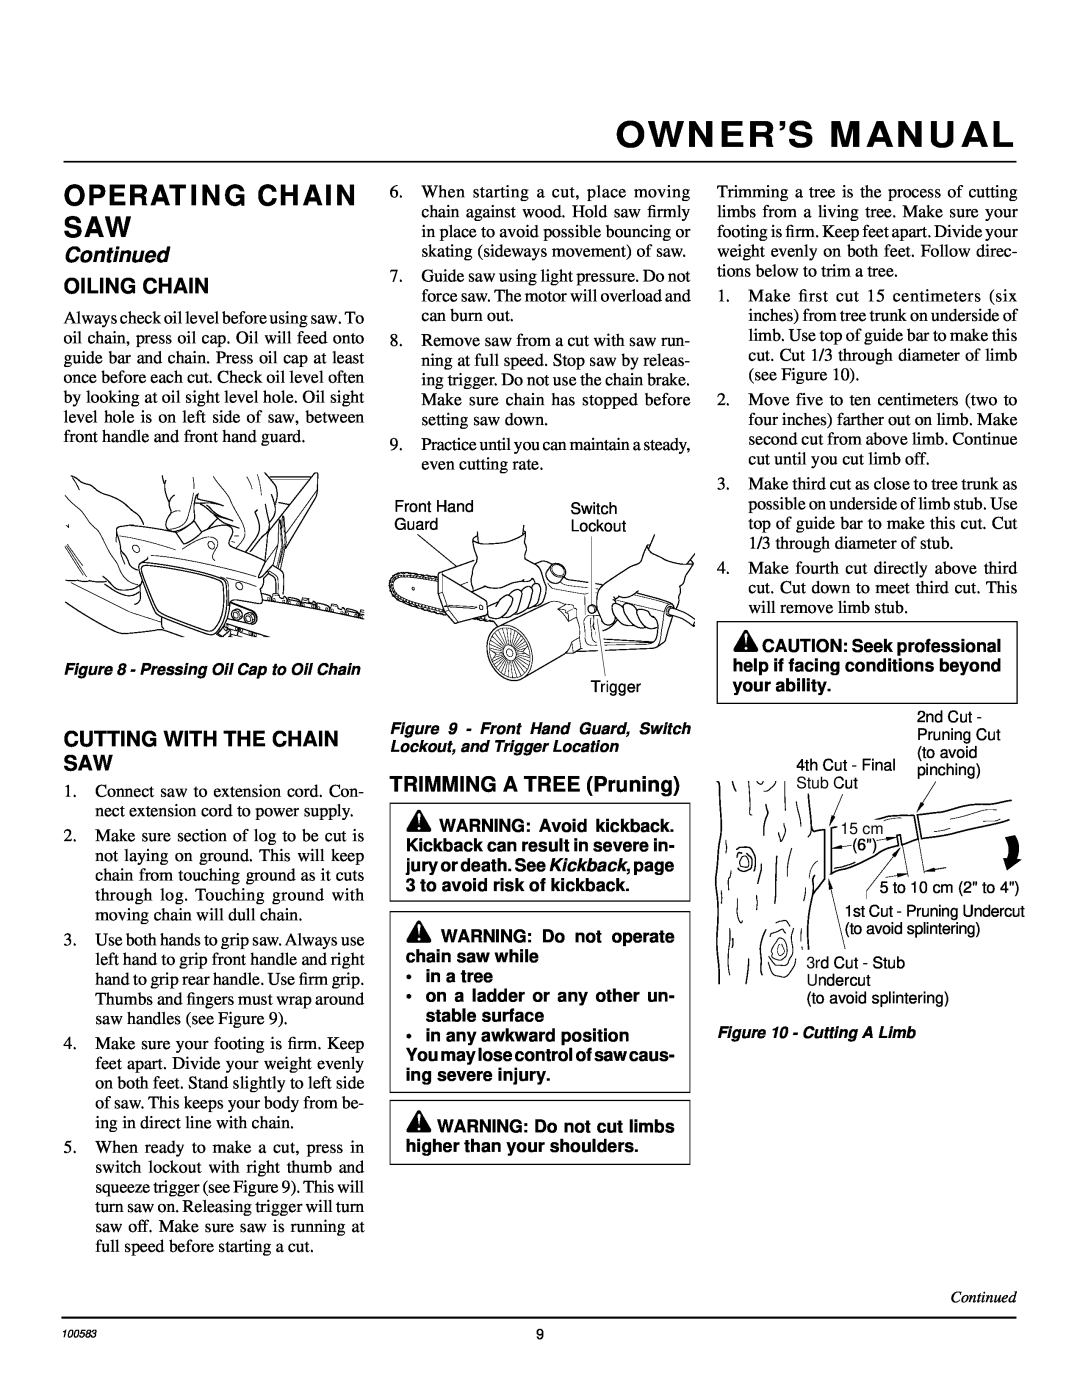 Remington EL-7 16-inch Oiling Chain, Cutting With The Chain Saw, TRIMMING A TREE Pruning, Operating Chain Saw, Continued 